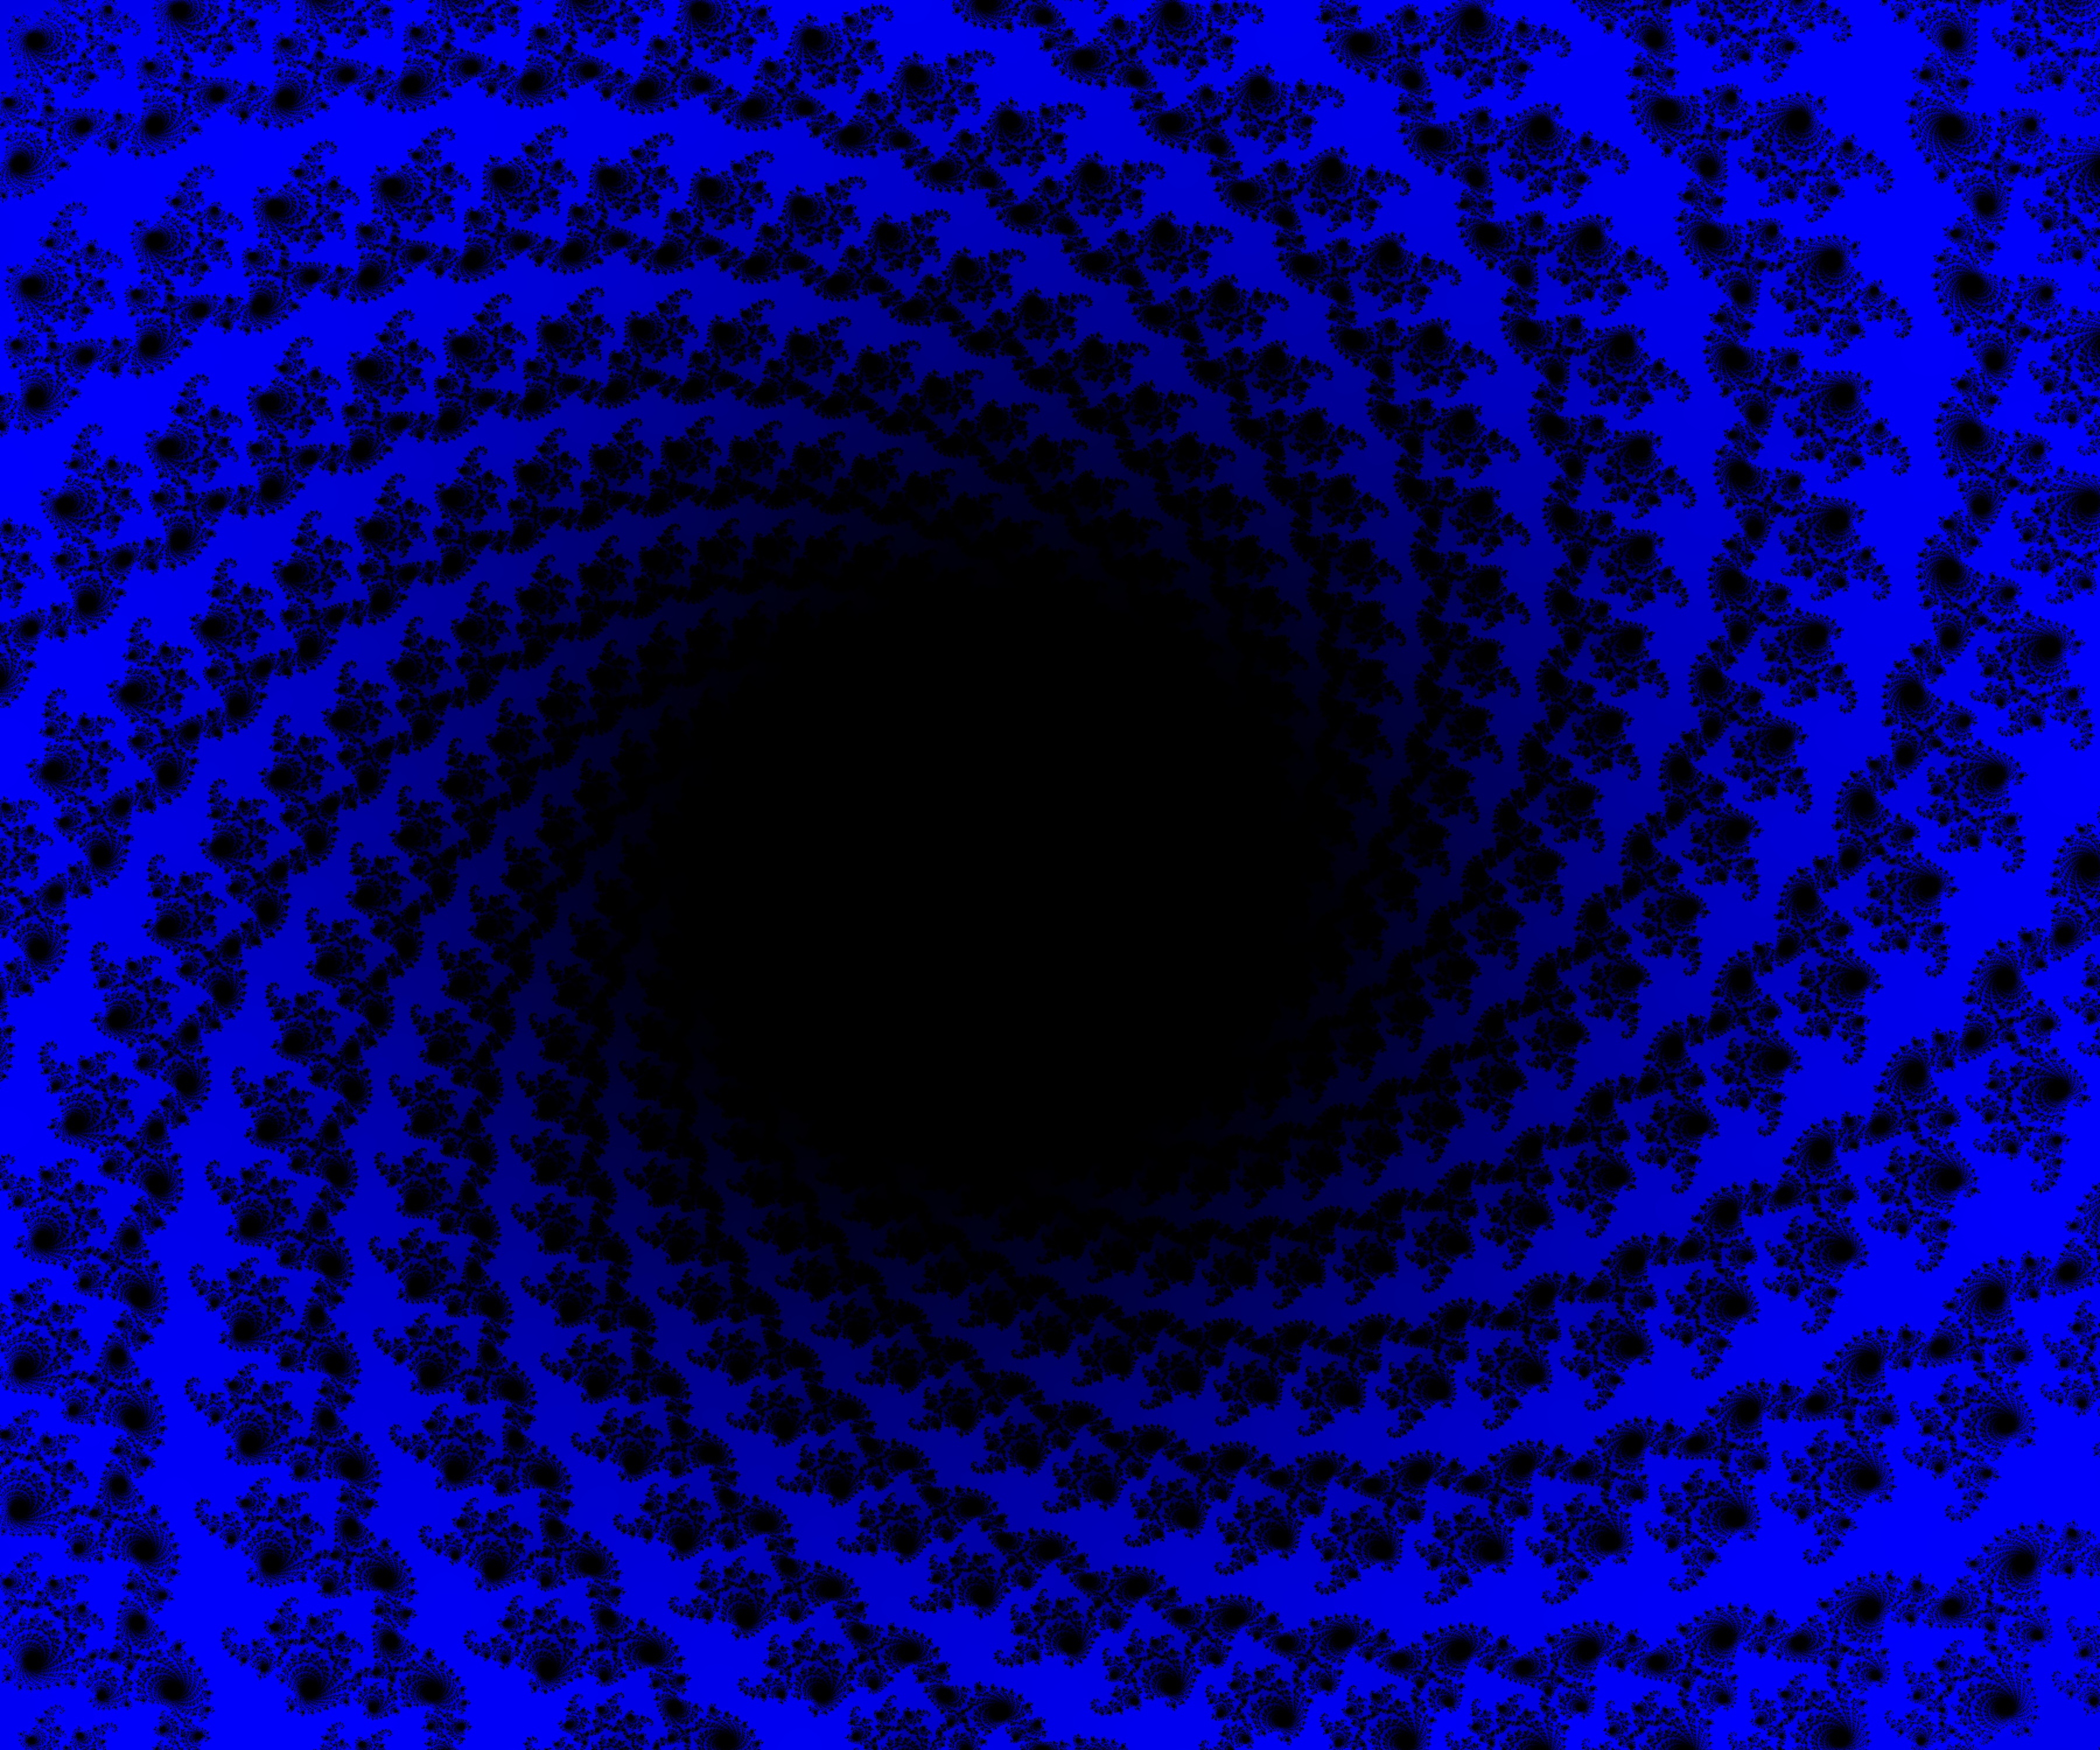 immersion, abstract, patterns, black, blue, rotation High Definition image